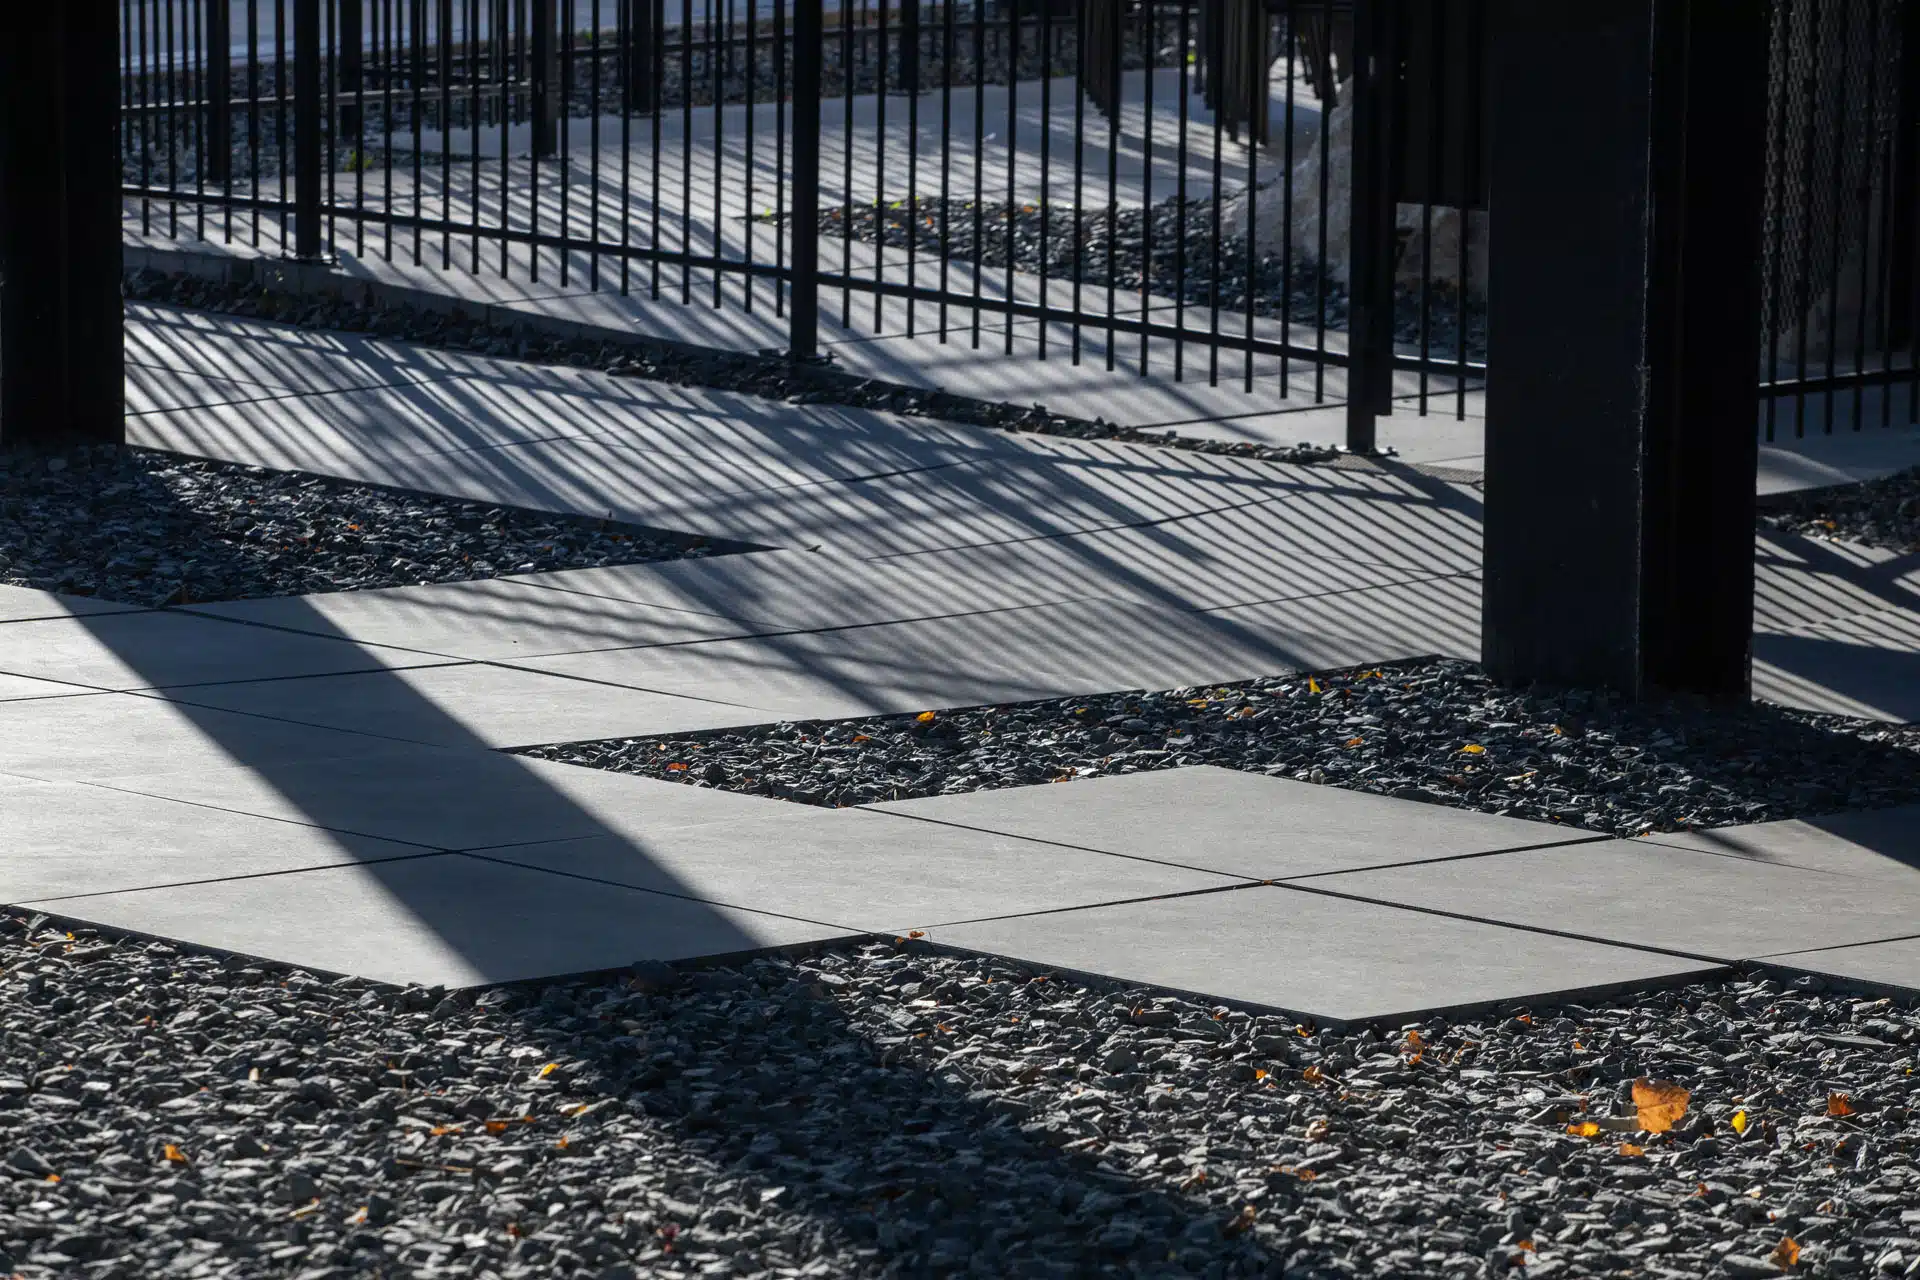 Paved stone path through gravel landscaping next to black metal fence